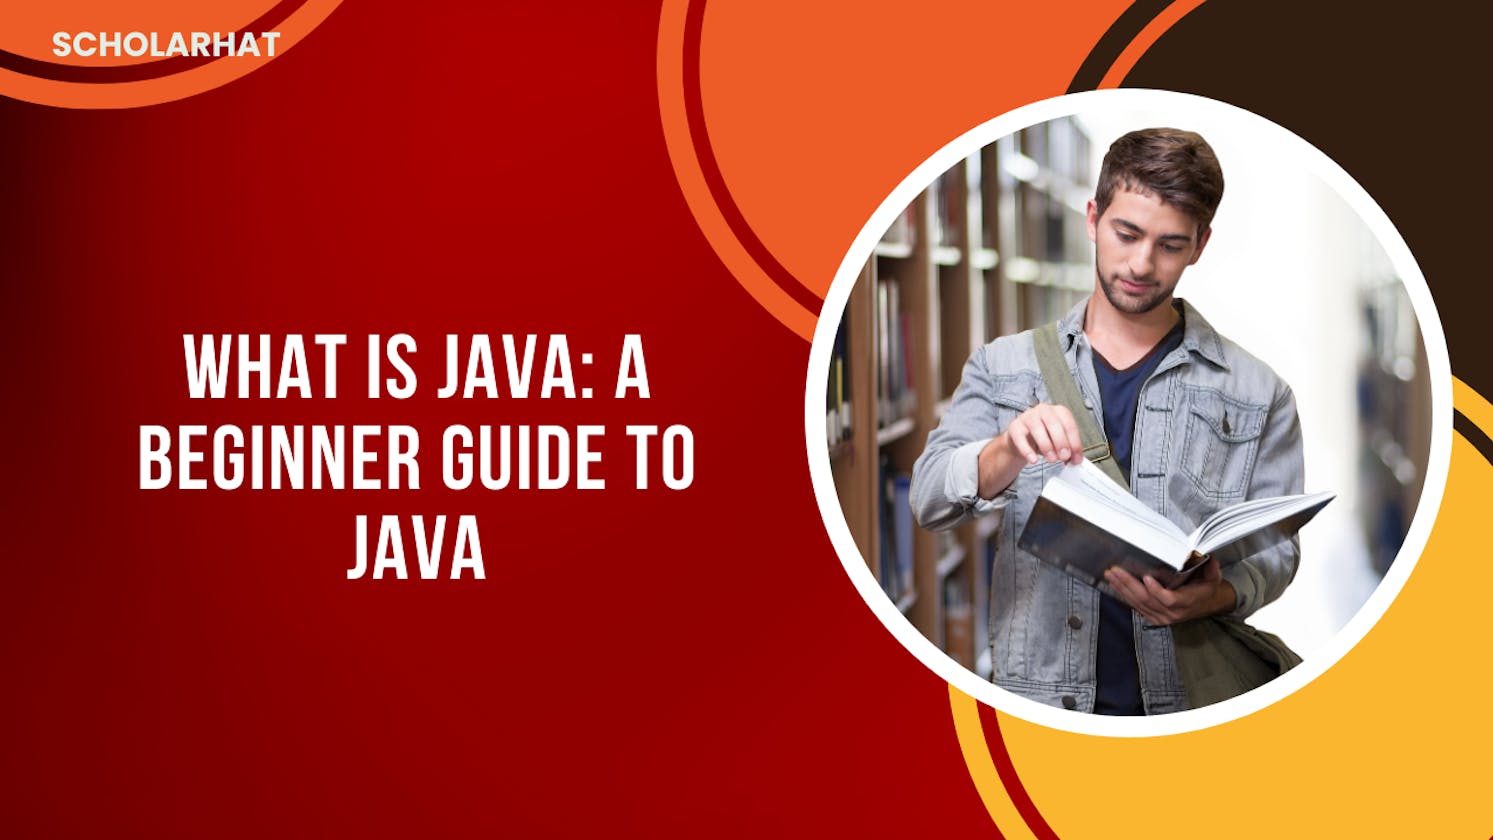 What is Java: A Beginner Guide To Java